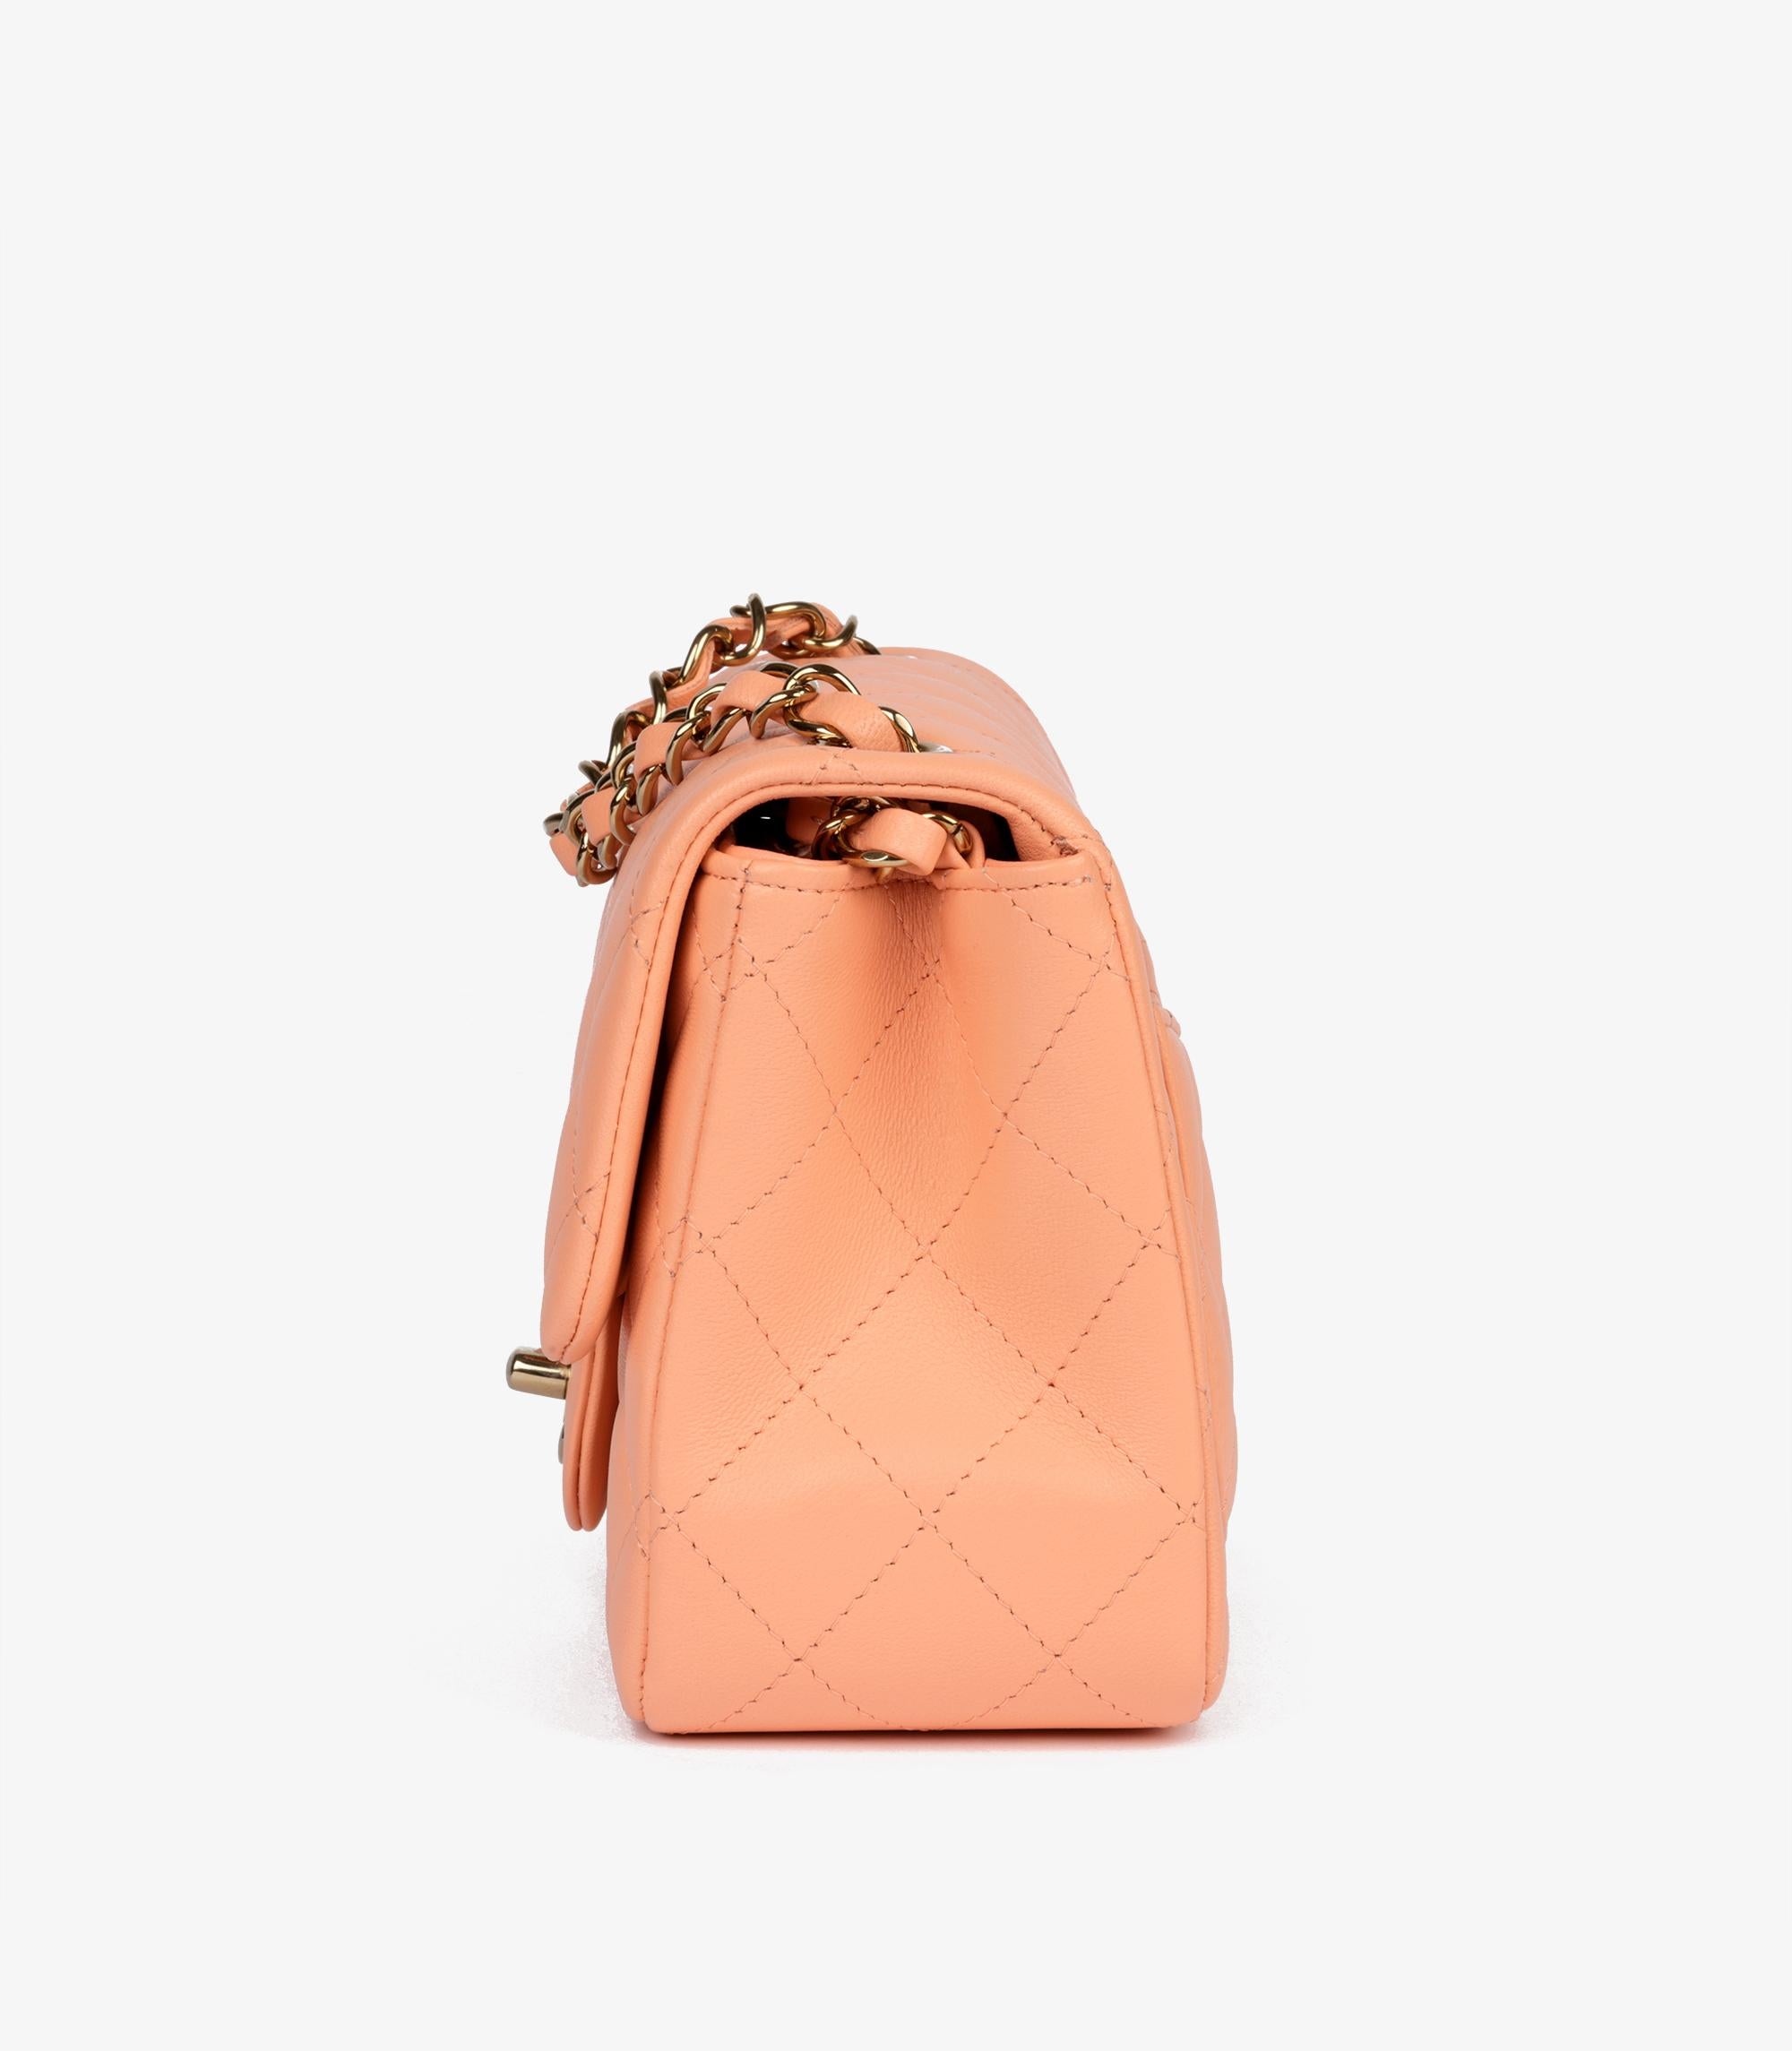 Chanel Salmon Peach Quilted Lambskin Square Mini Flap Bag For Sale 2